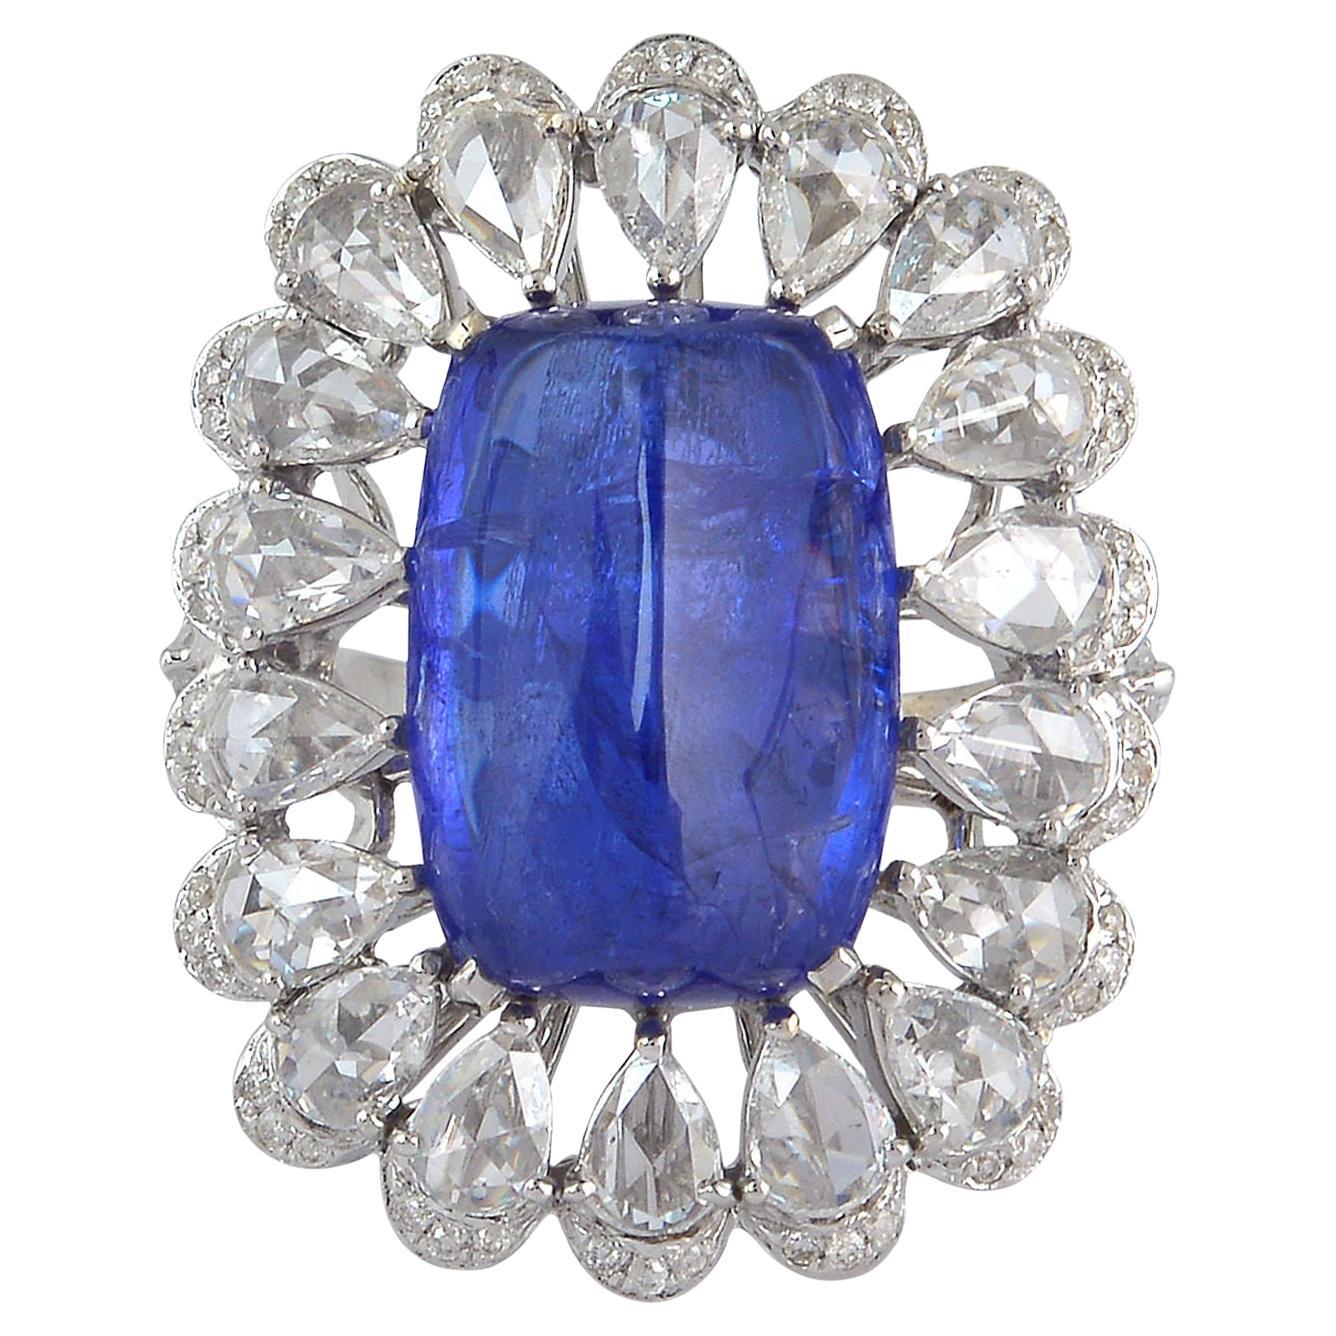 15.1ct Cushion Shaped Blue Tanzanite Cocktail Ring With Pear Diamonds